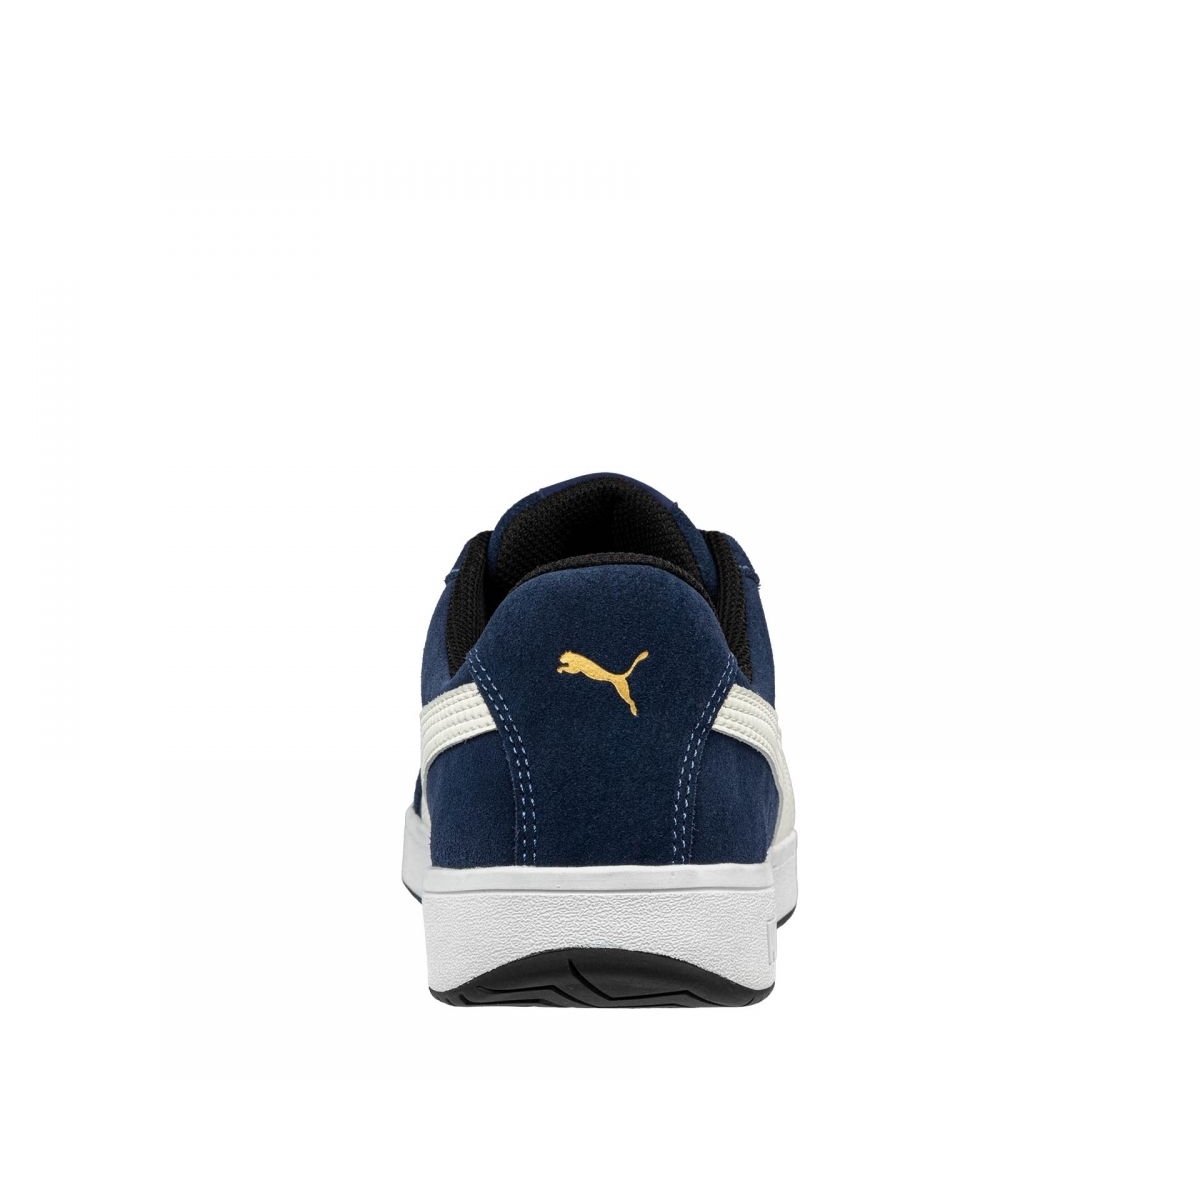 PUMA Safety Men's Iconic Low Composite Toe EH Work Shoes Navy Suede - 640025 ONE SIZE Navy - Navy, 10.5